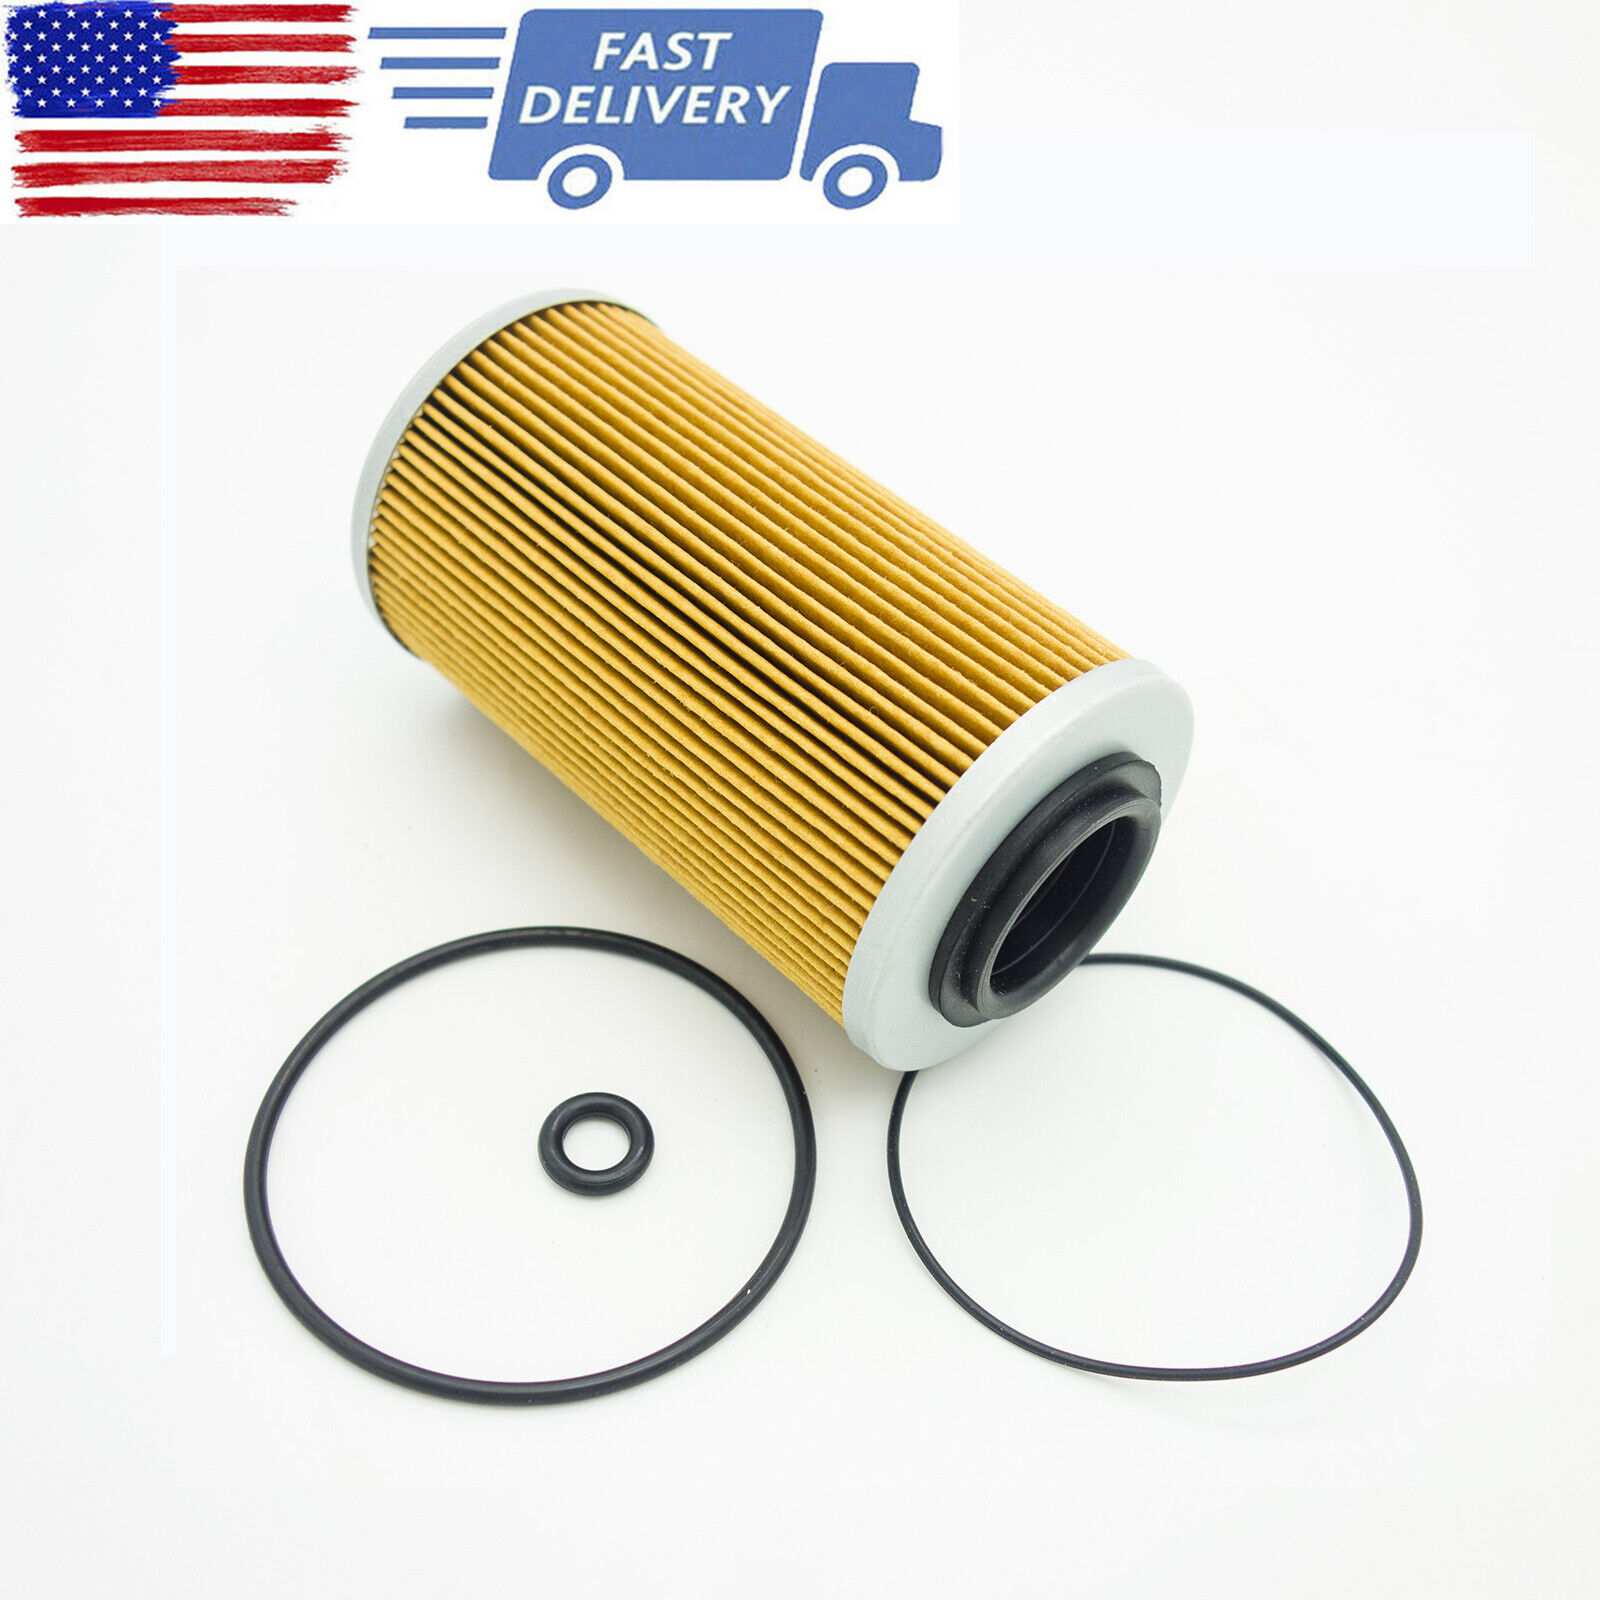 New For SEADOO OIL FILTER GTI GTS SE GTX RXP RXT 130 155 185 215 255 260 US